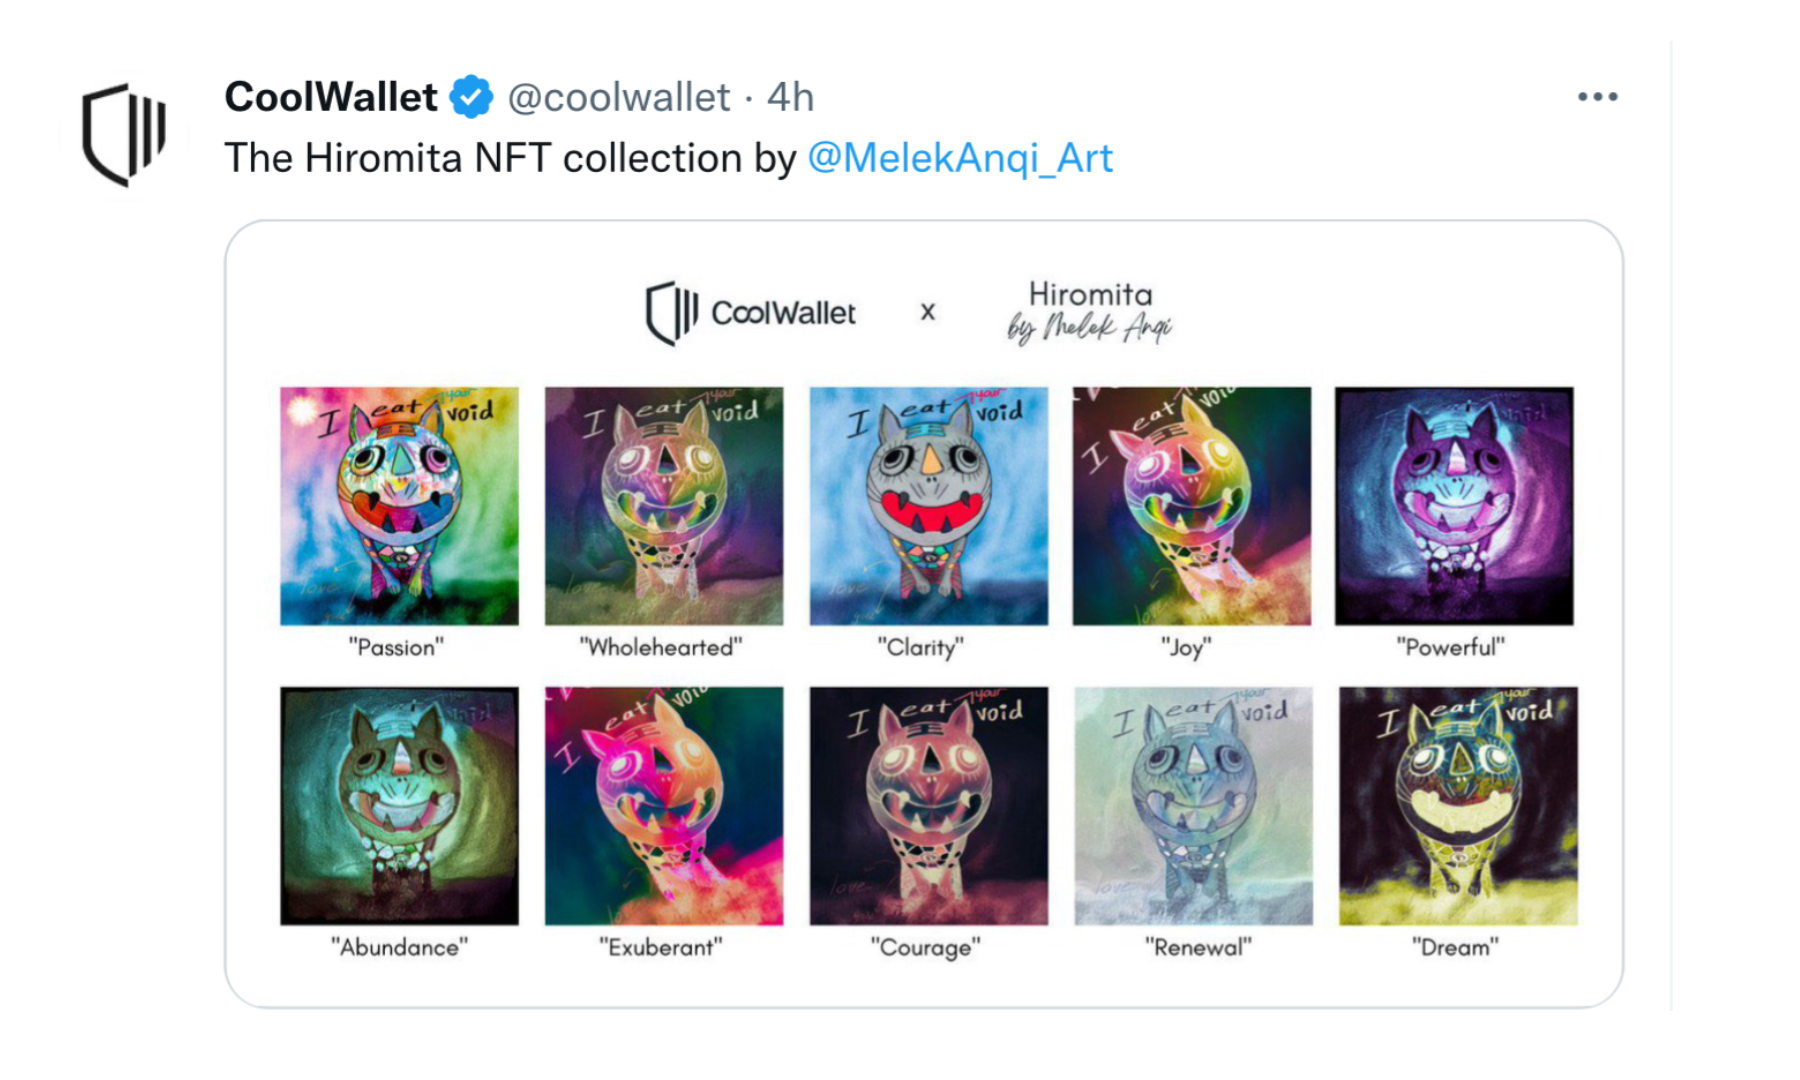 CoolWallet's Tweet of the NFT Collection